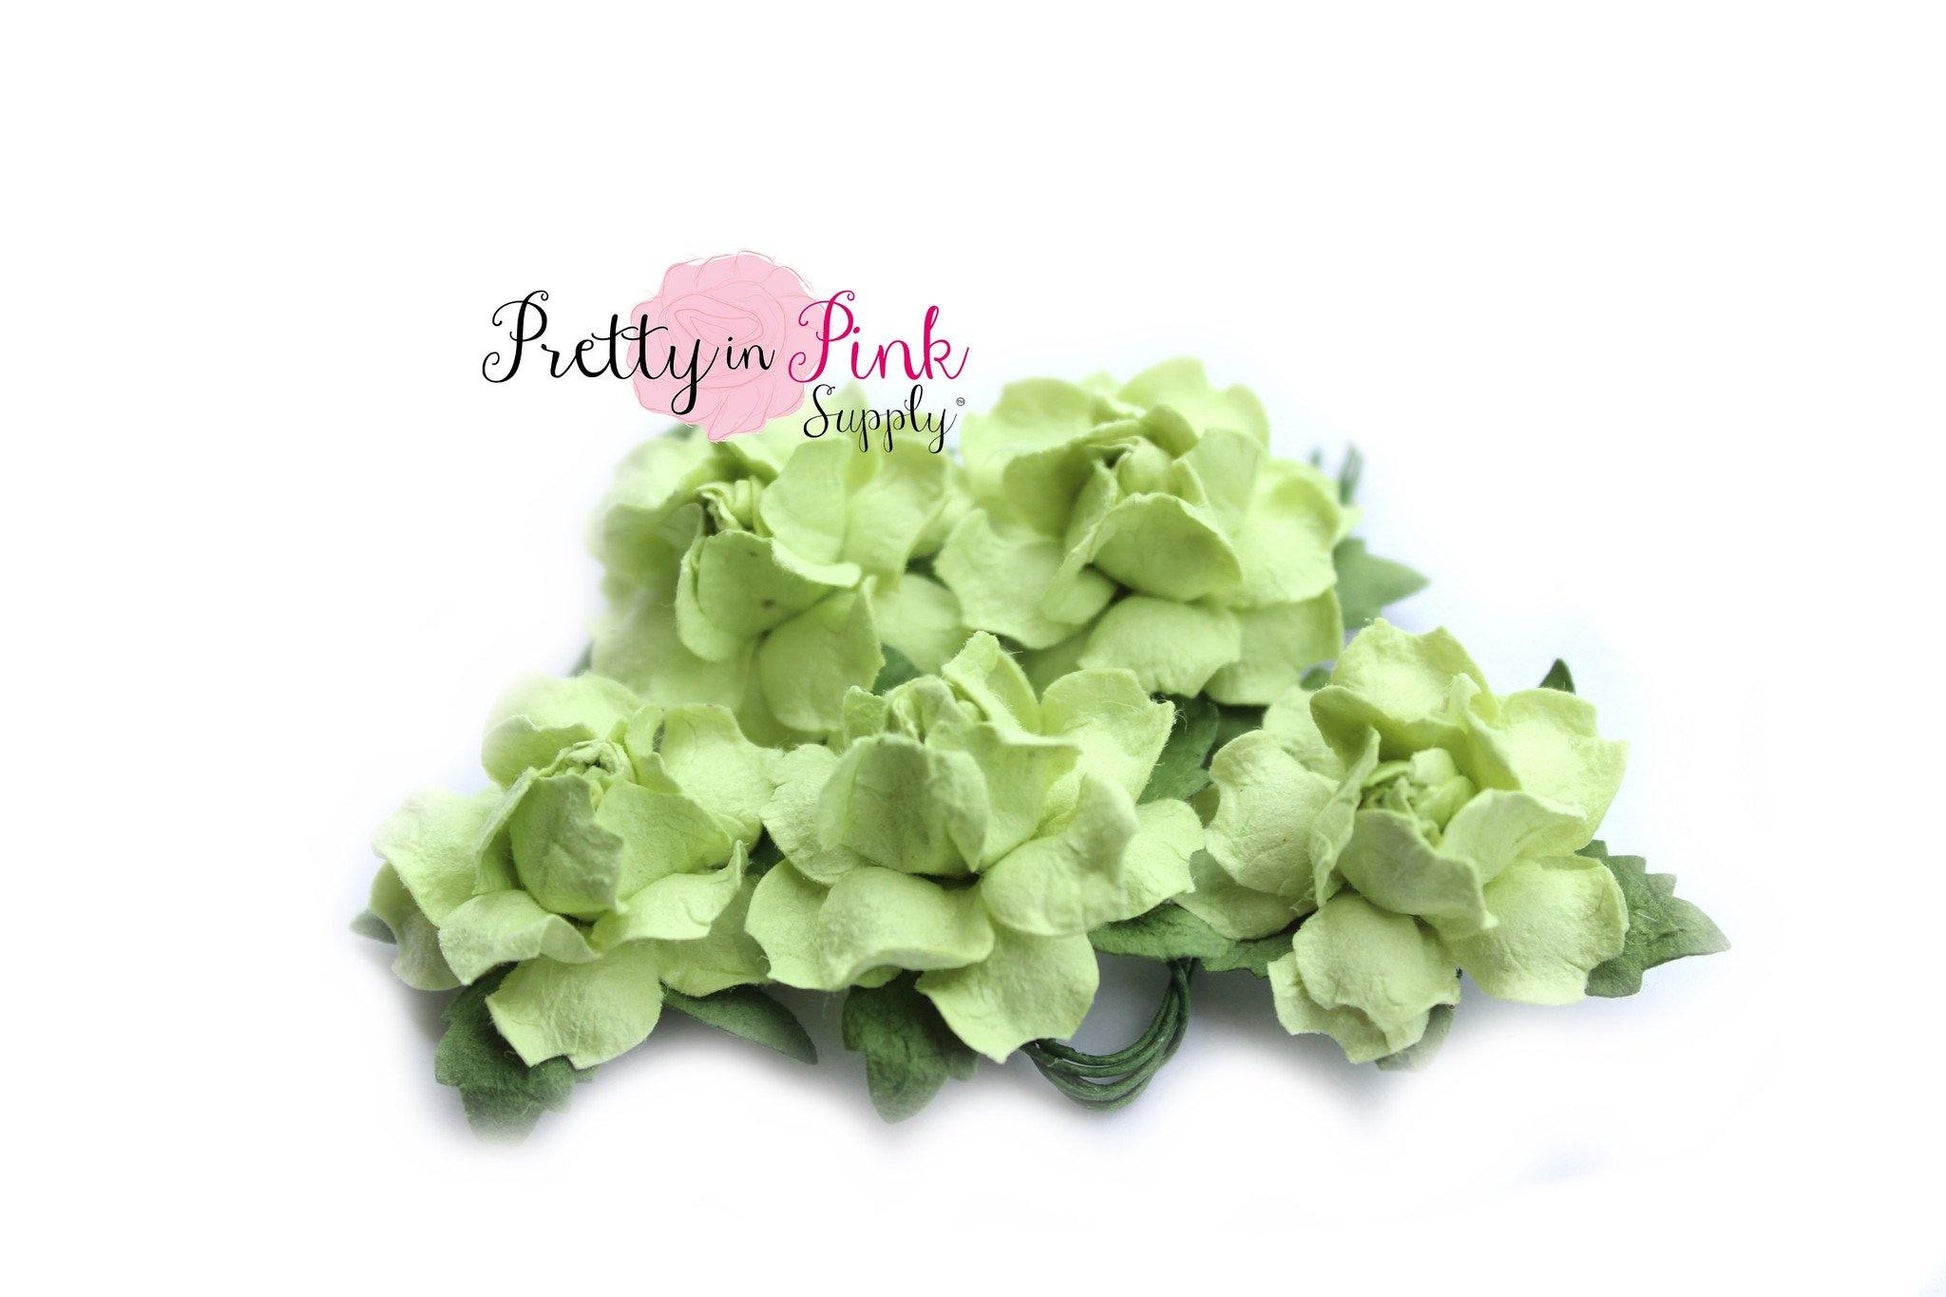 1" PREMIUM Pale Green Paper Flowers - Pretty in Pink Supply